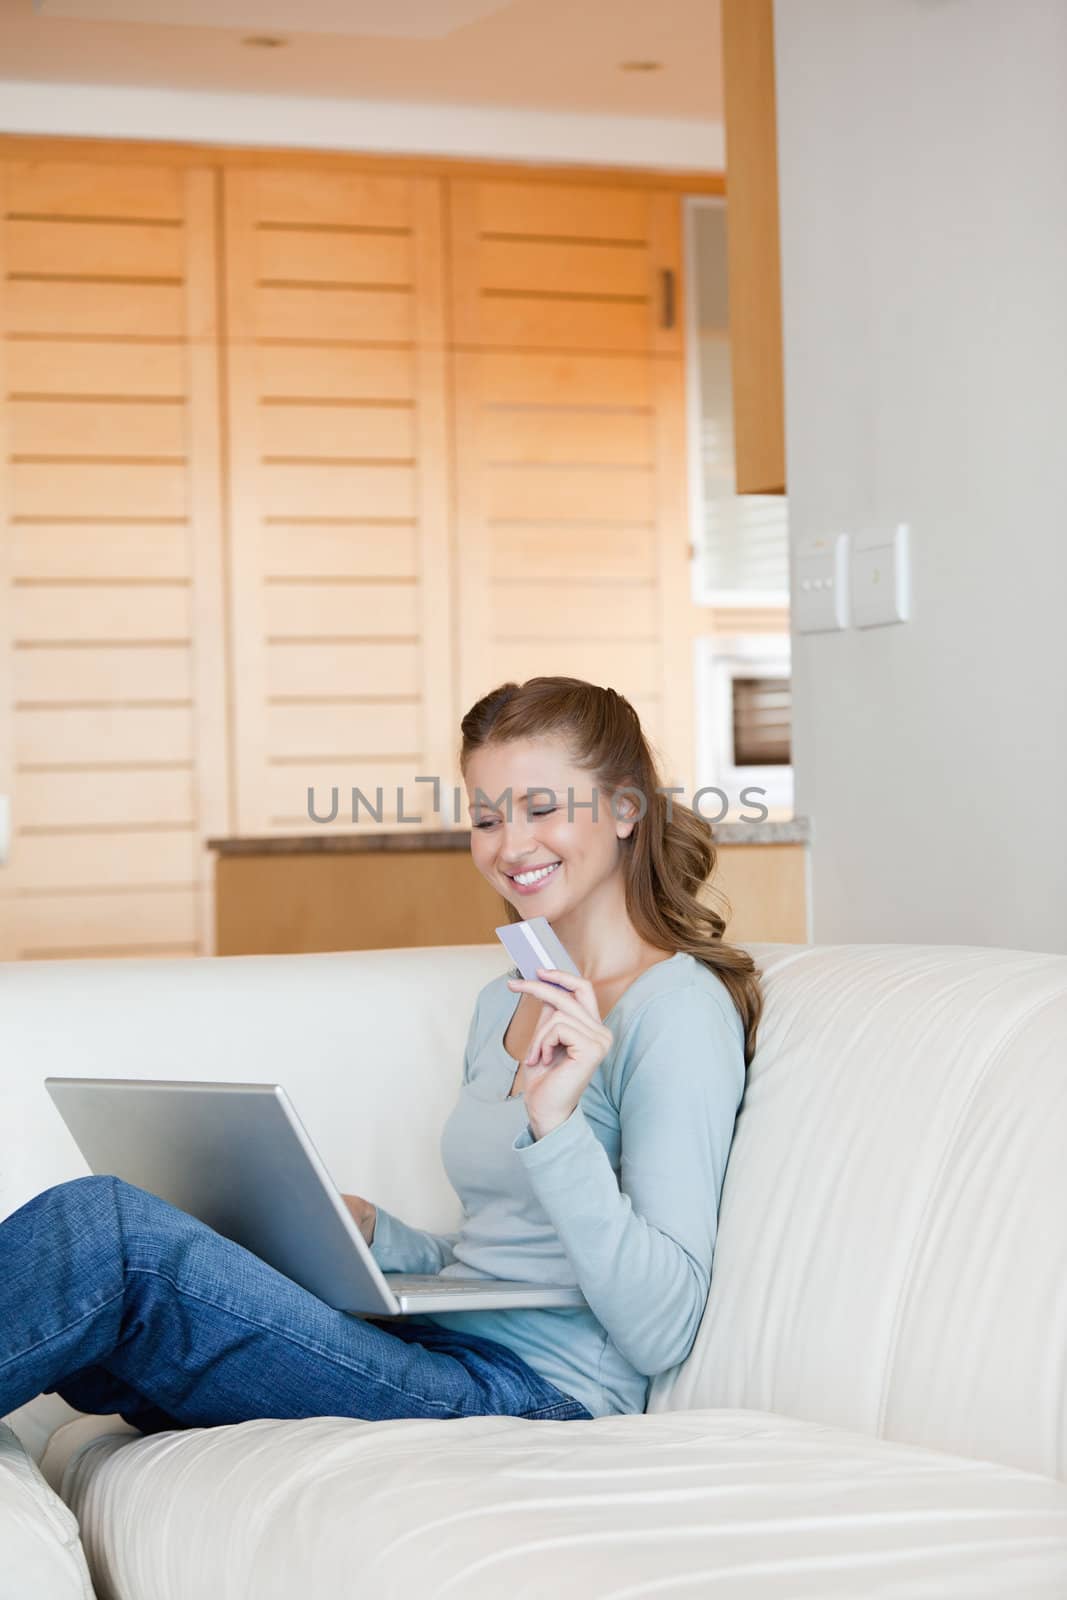 Woman using a laptop while holding a card in a sitting room